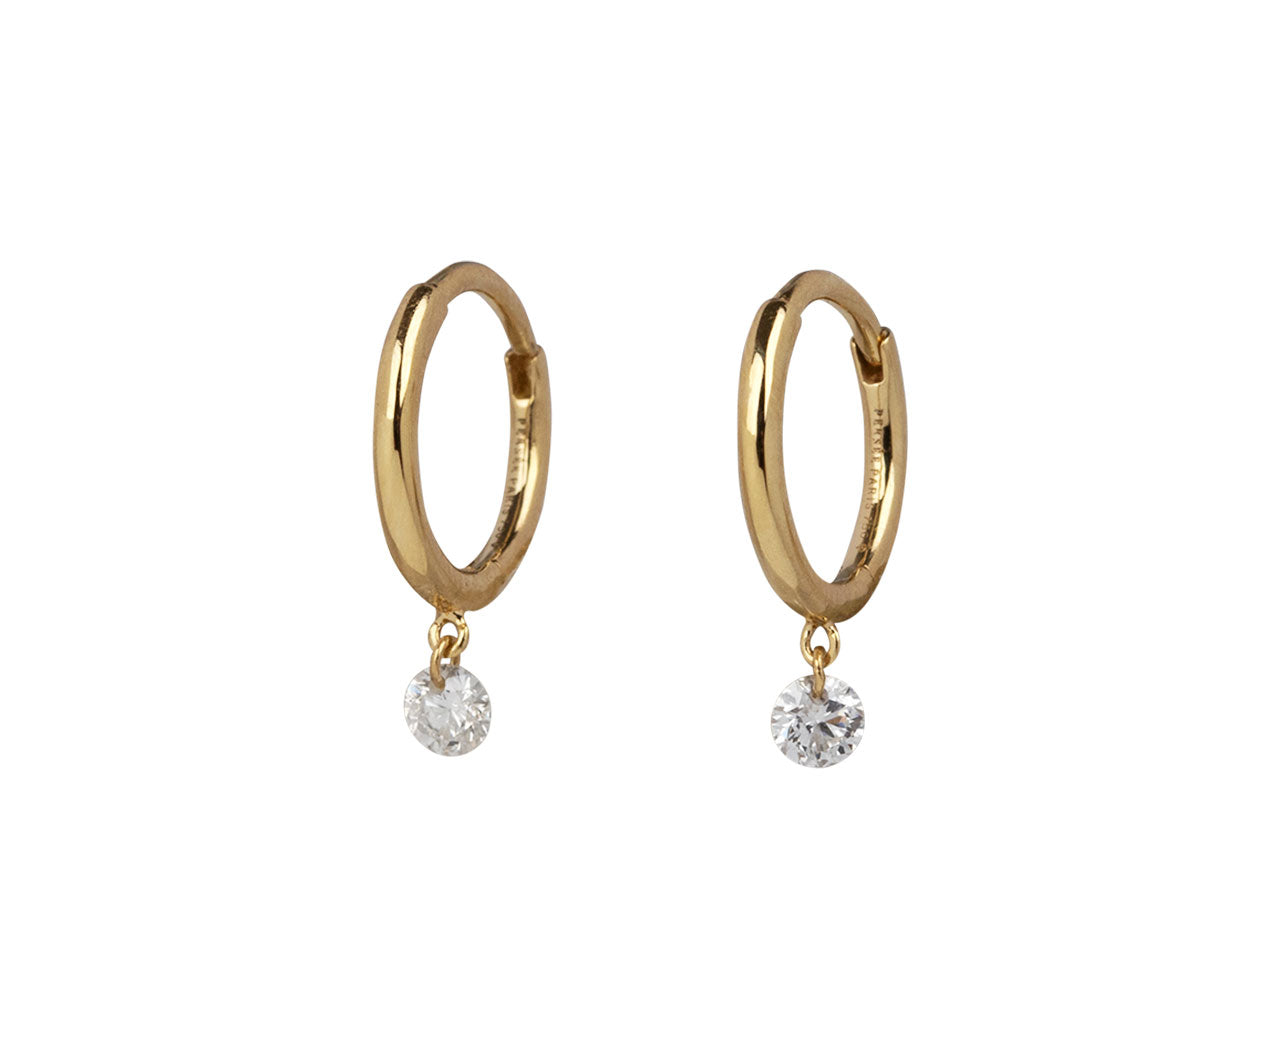 SKN Jewellery Special Gold Plated Alloy Big Round Hoop Earrings for Women ( Gold, 7 cm) : Amazon.in: Fashion